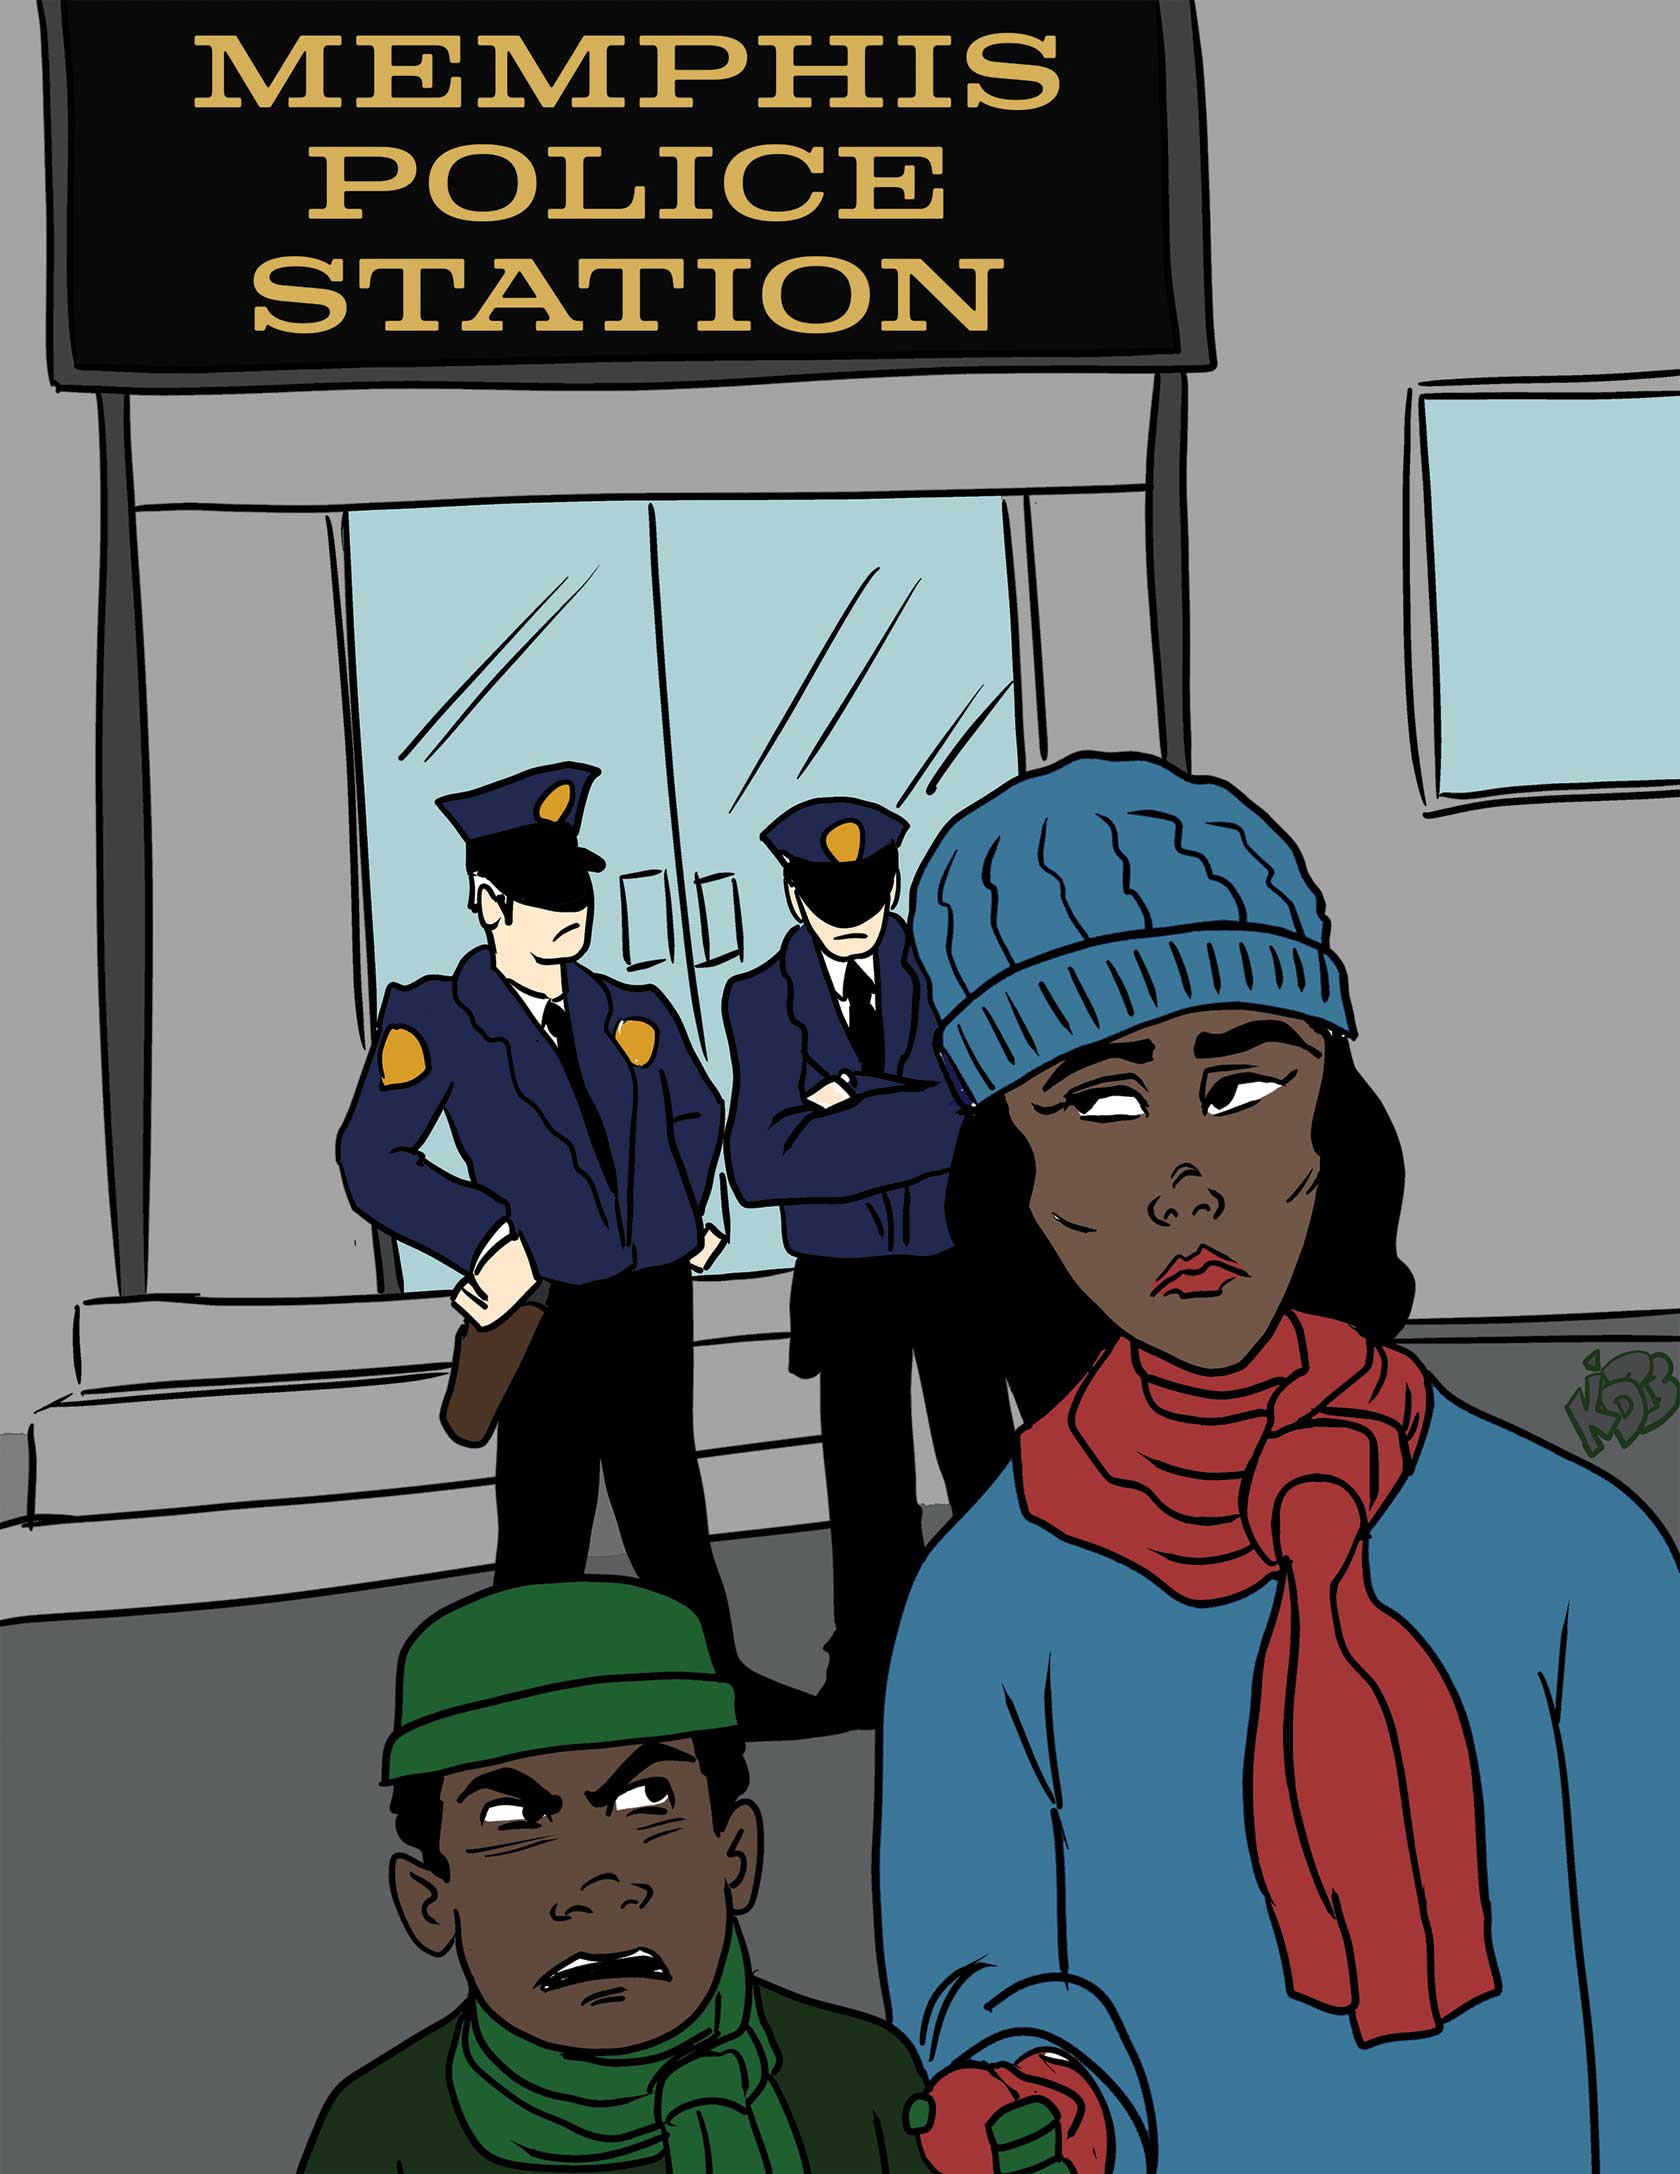 Police Brutality Corrupts Americas Stature The Bay State Banner